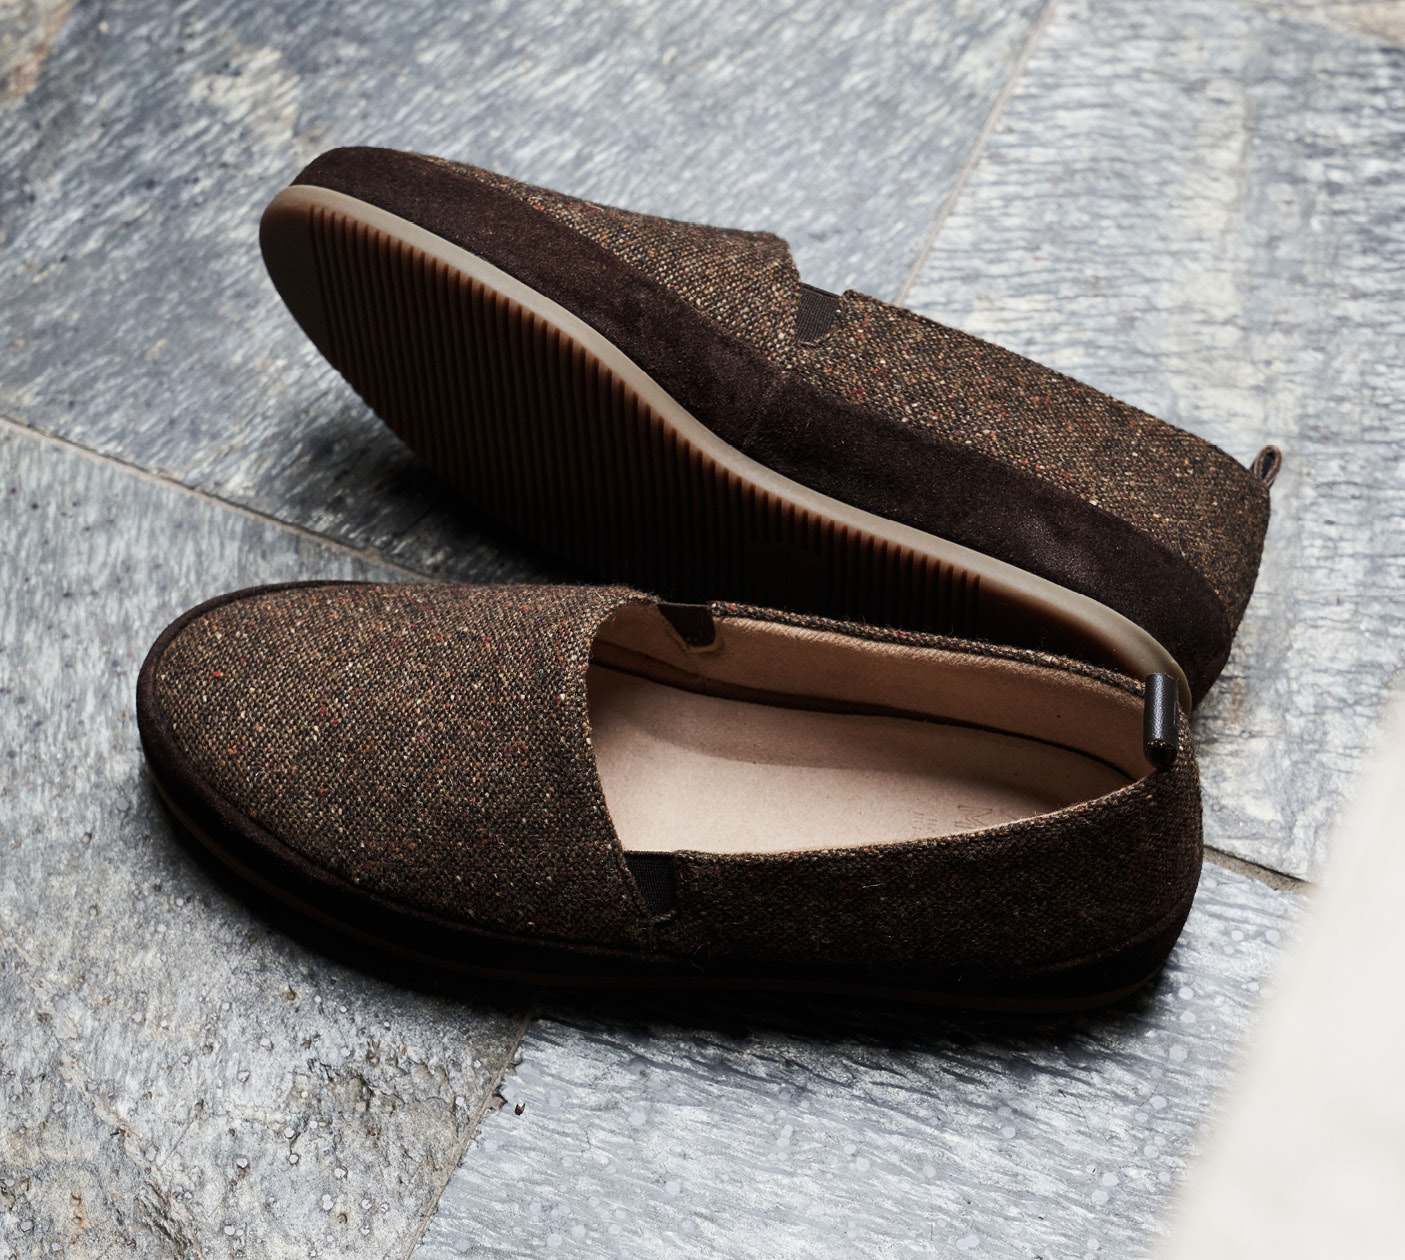 Slipper Appreciation Society - Mens Slippers - Donegal Tweed House Shoes